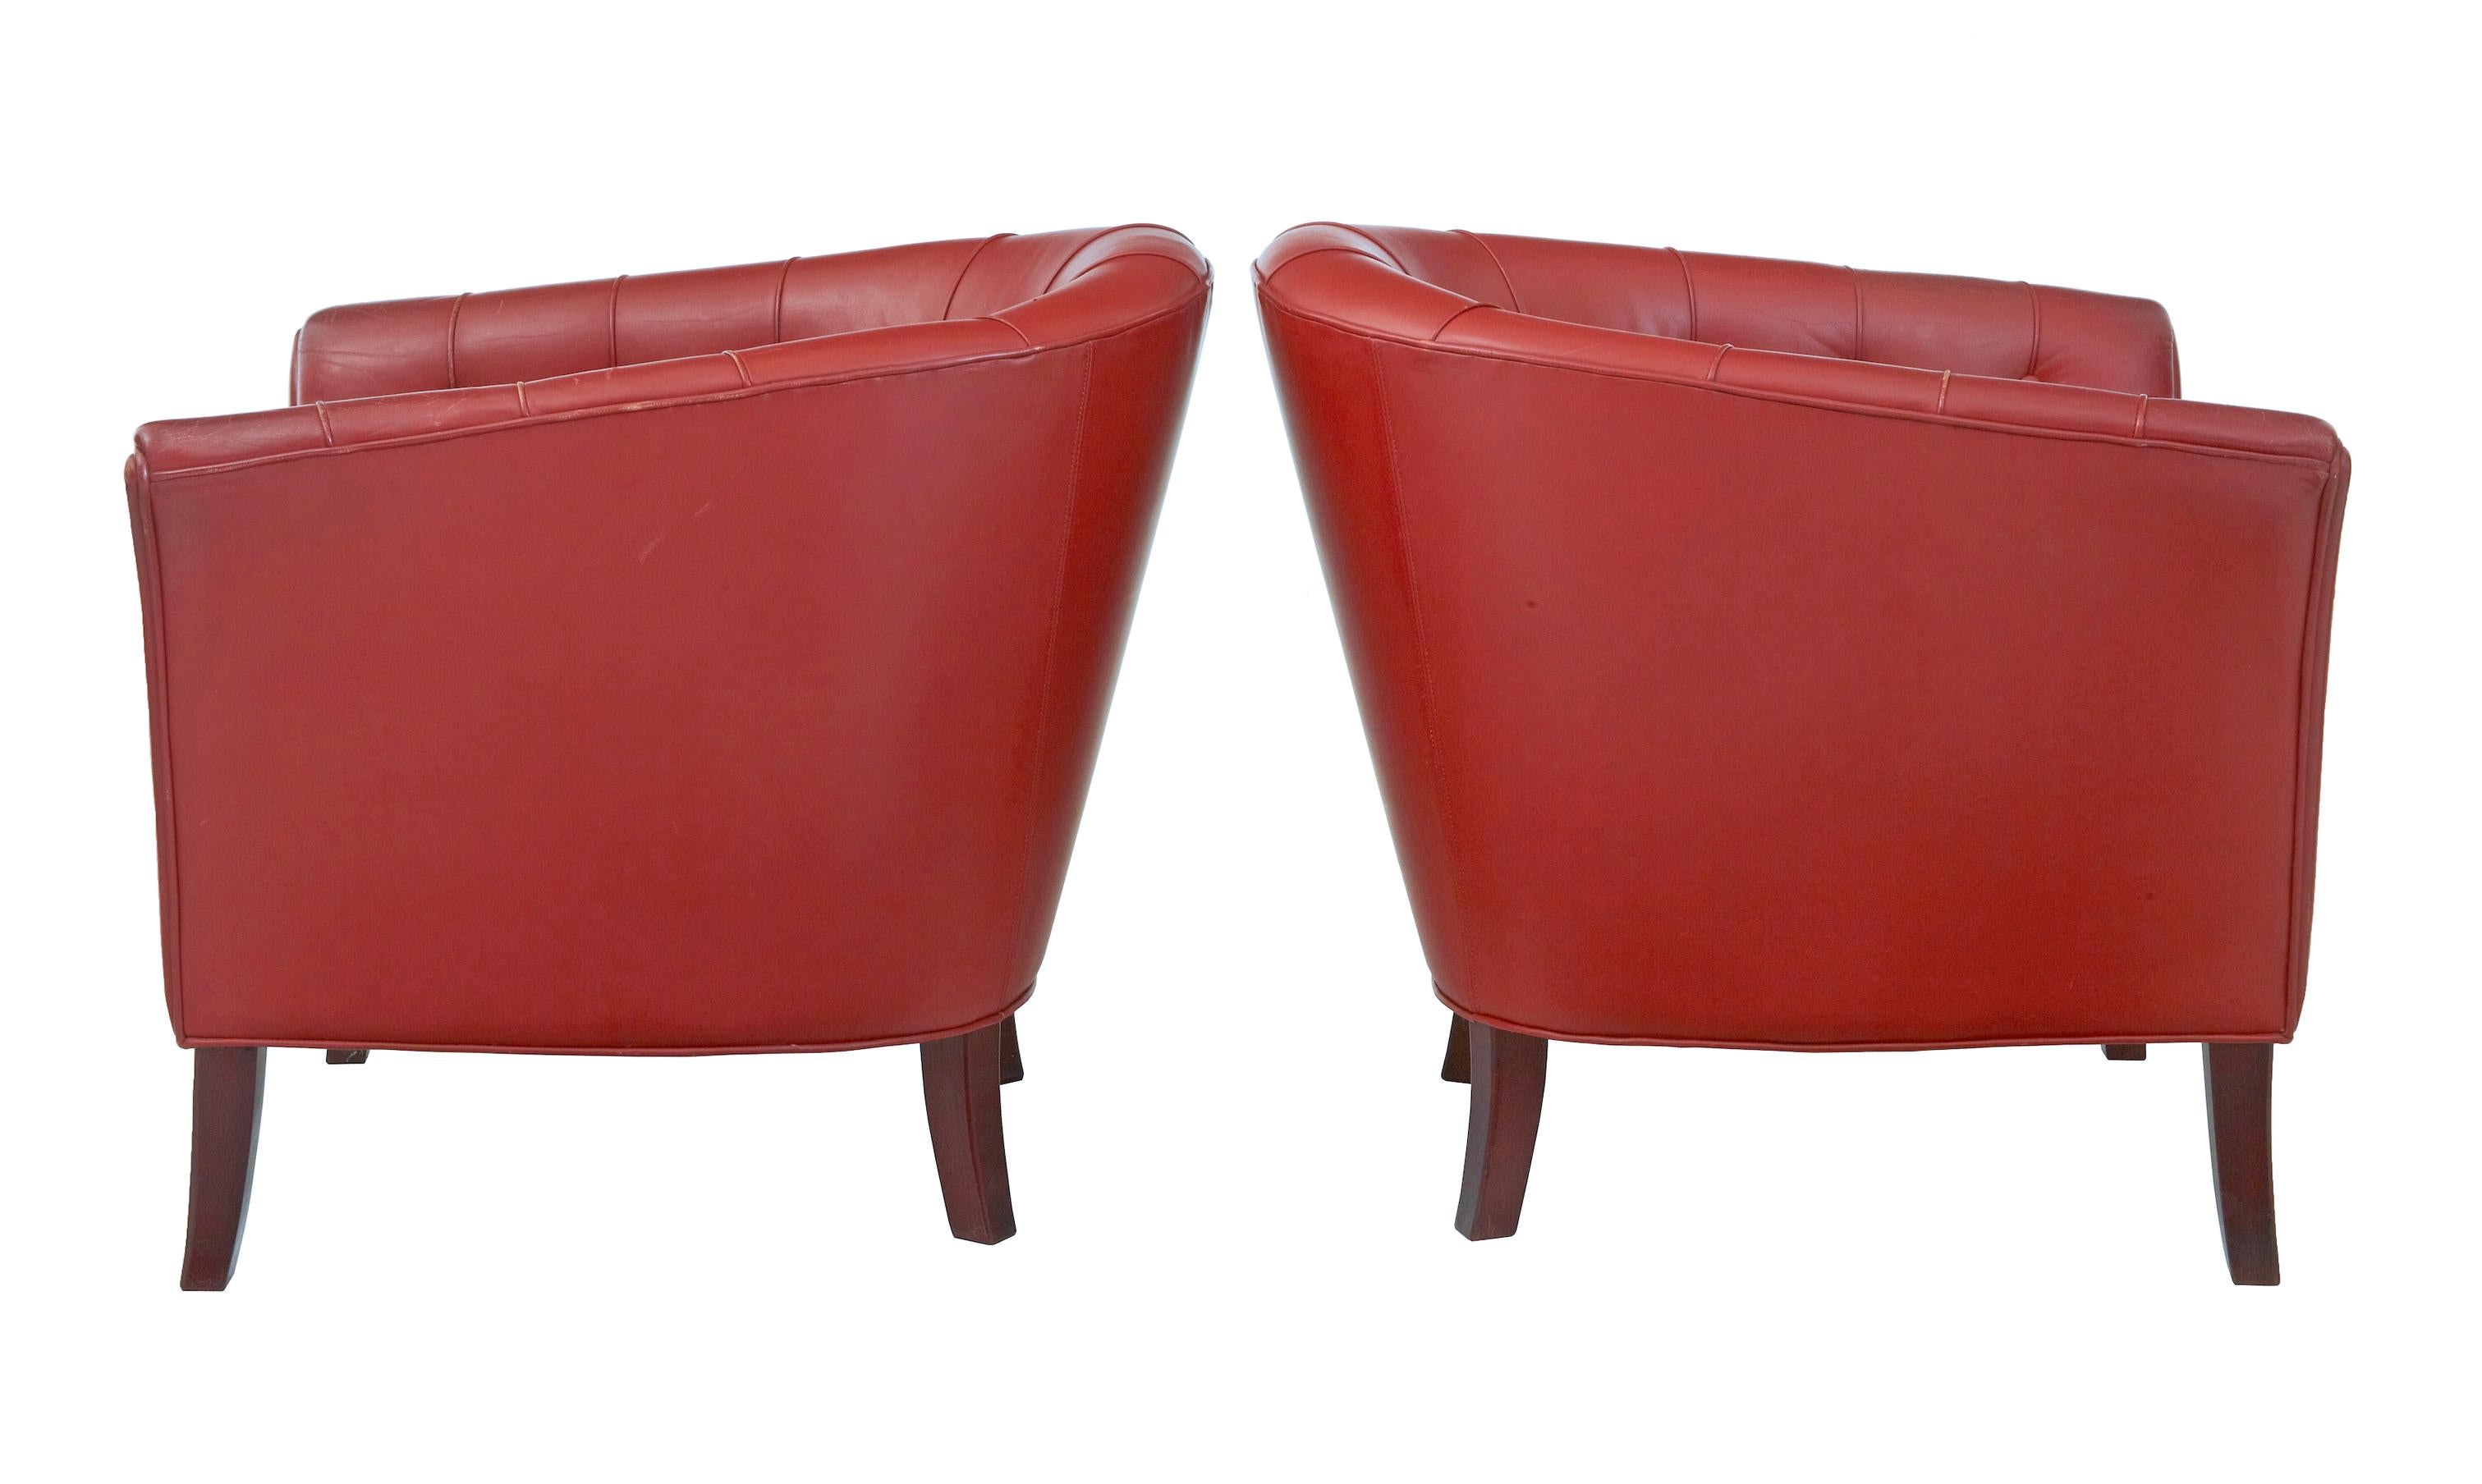 Pair of mid-20th century Scandinavian leather club armchairs, circa 1970.

Very comfortable and elegantly shaped pair of armchairs, upholstered in rusty red leather with button back detailing and piping.

Standing on dark stained tapering